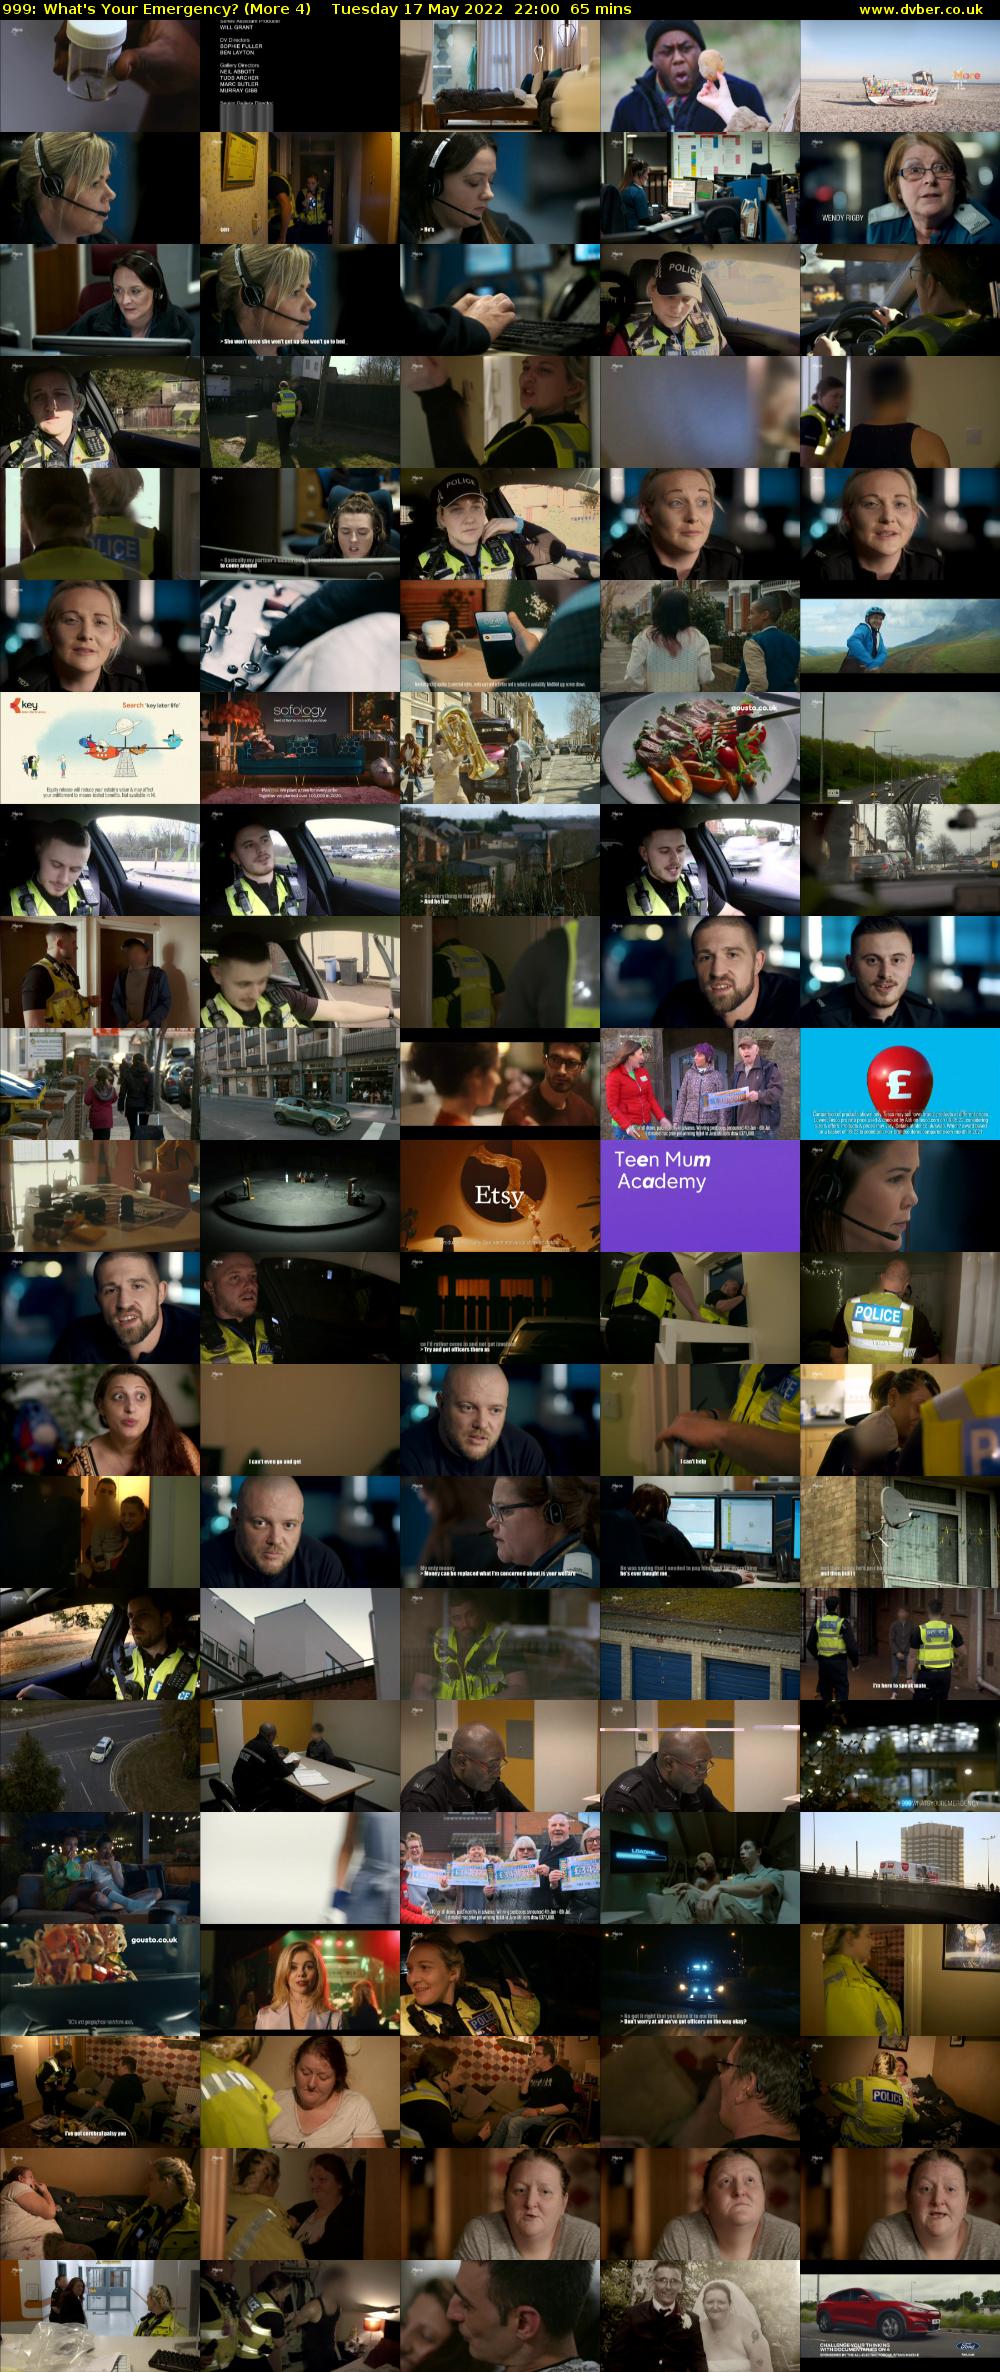 999: What's Your Emergency? (More 4) Tuesday 17 May 2022 22:00 - 23:05